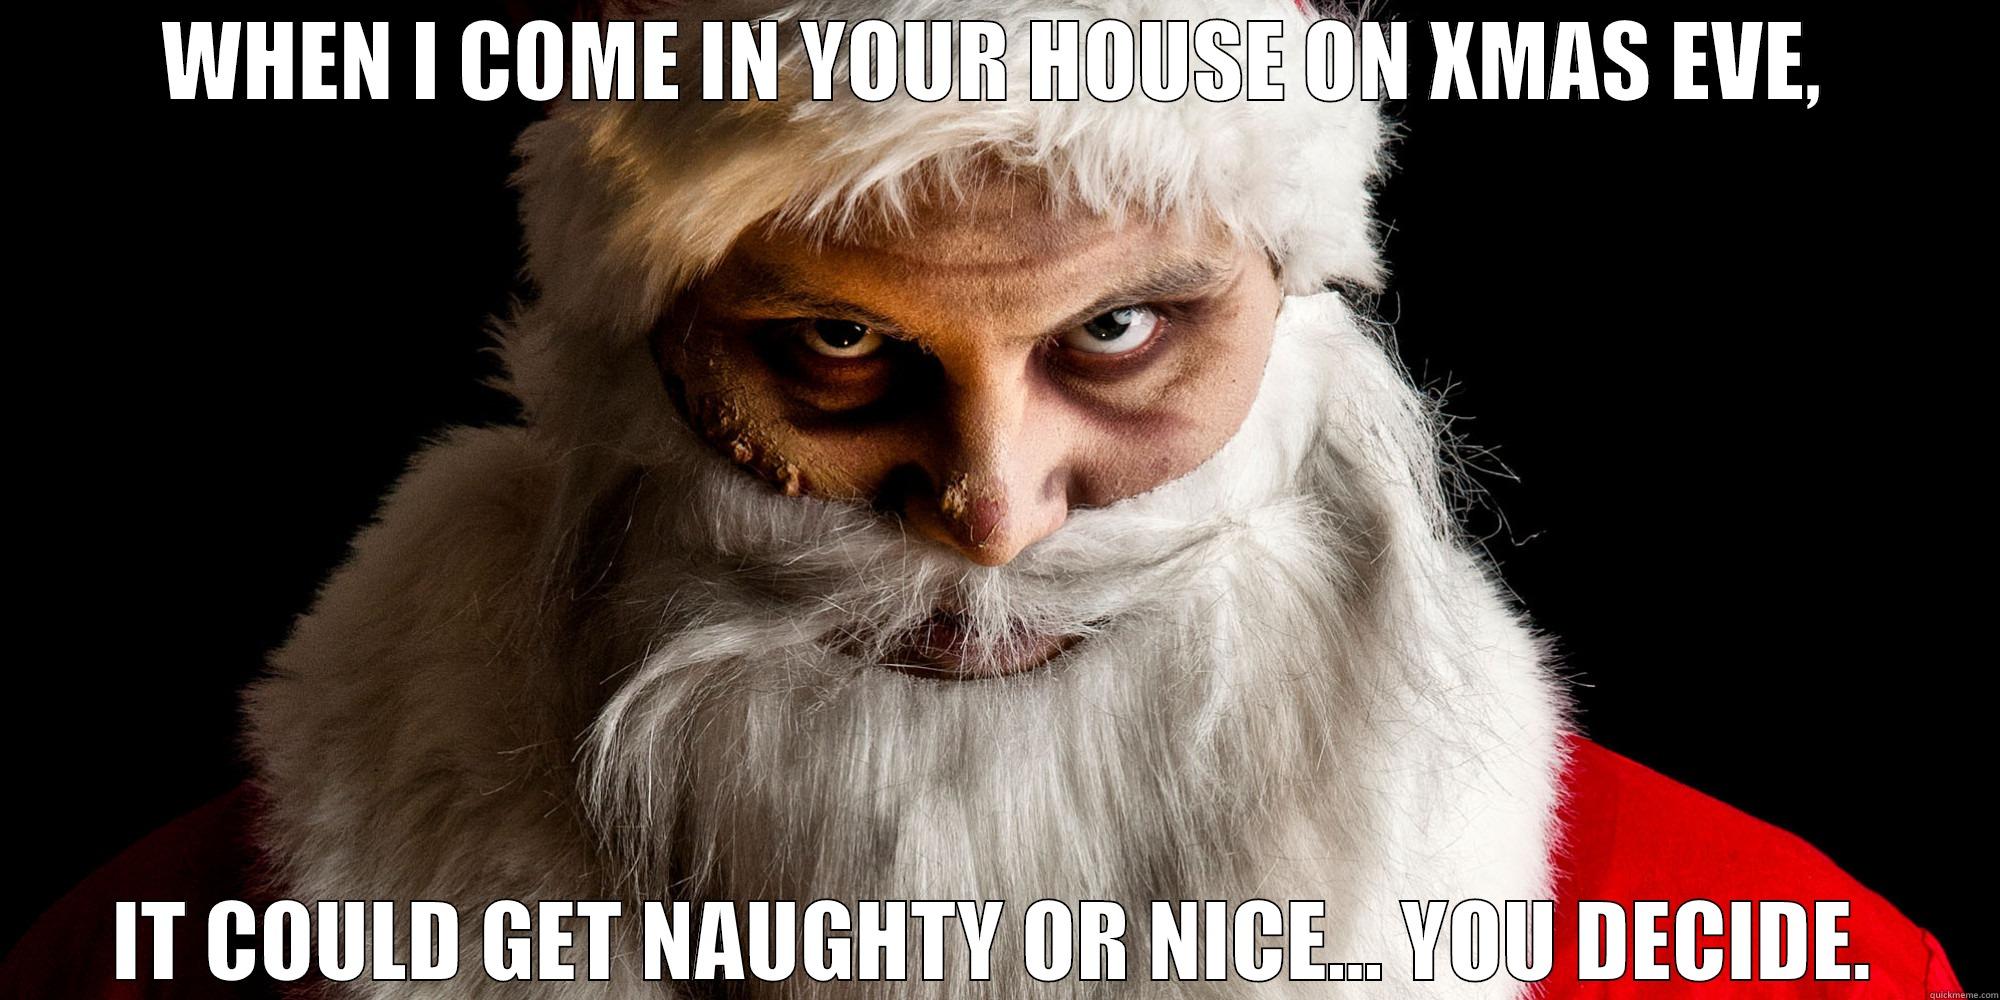 WHEN I COME IN YOUR HOUSE ON XMAS EVE, IT COULD GET NAUGHTY OR NICE... YOU DECIDE. Misc